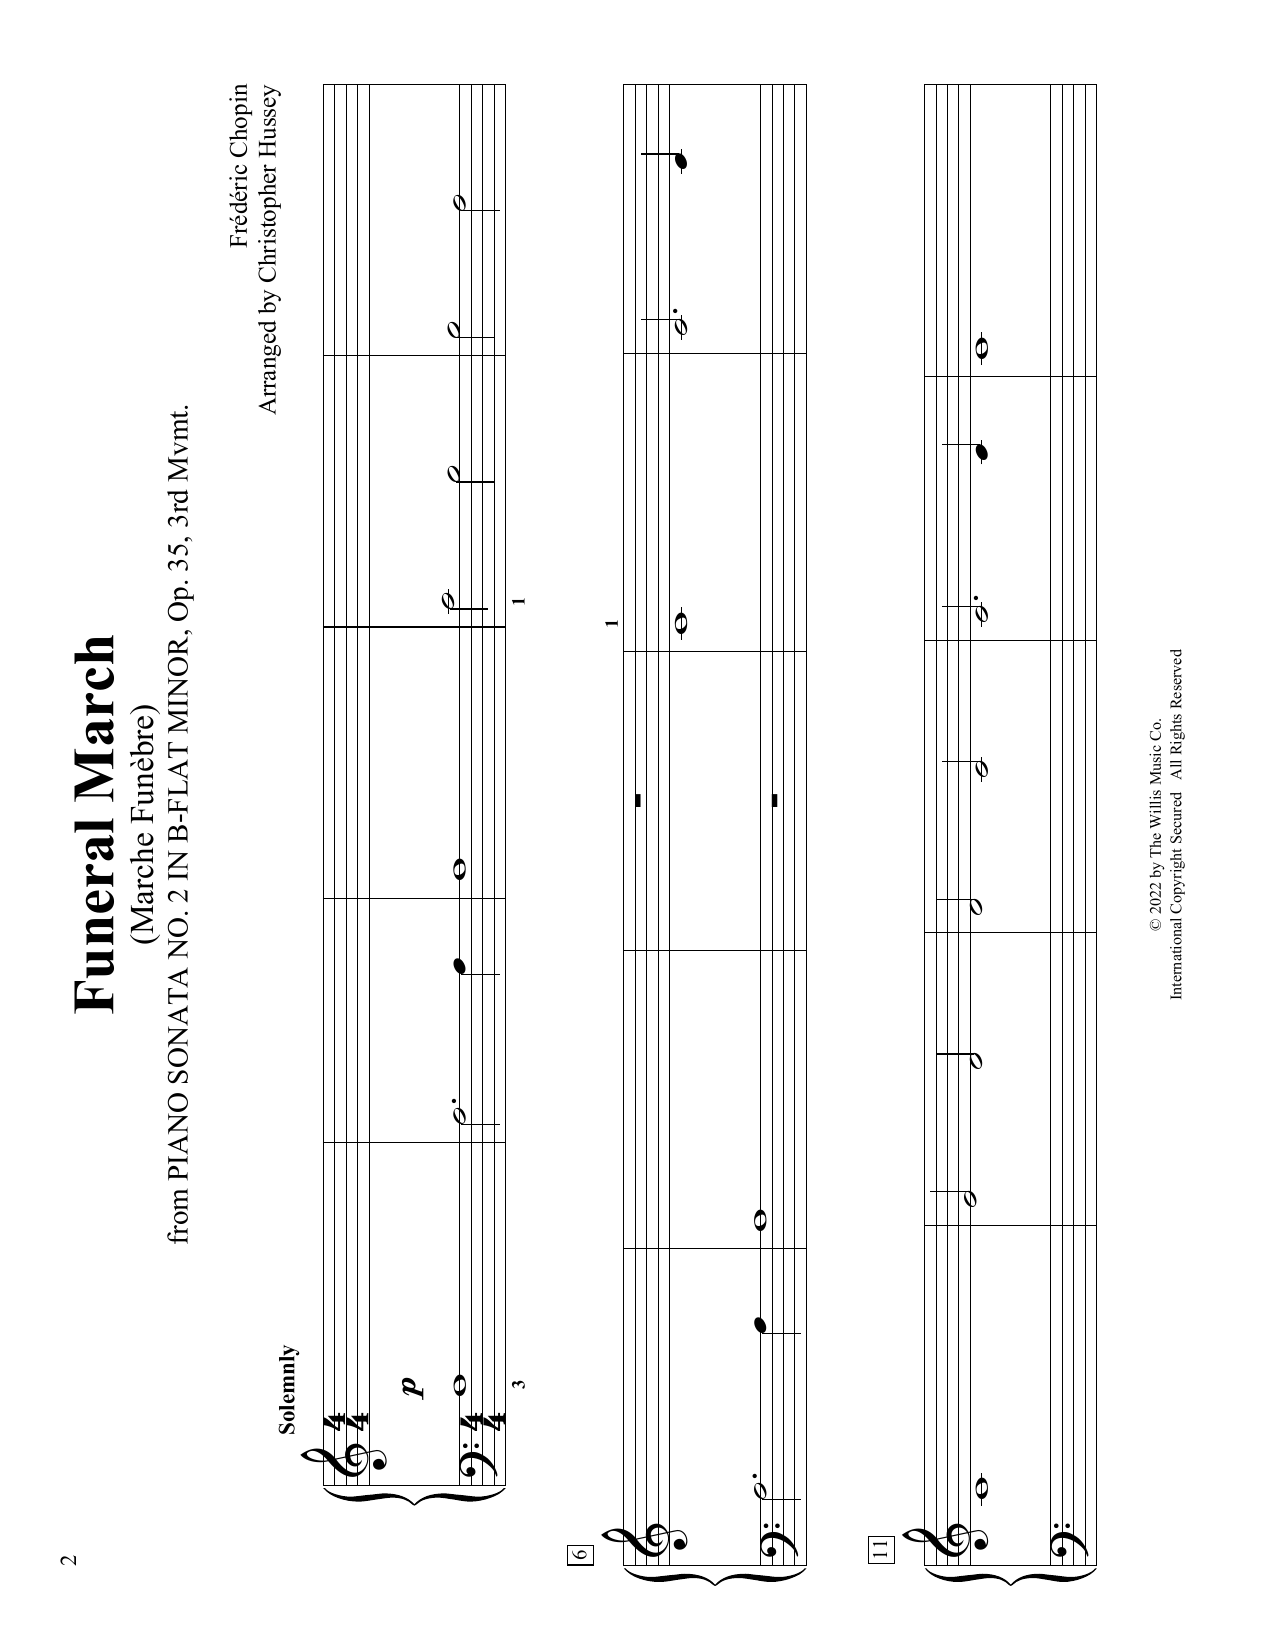 Download Frederic Chopin Funeral March (Marche Funebre), Op. 35 Sheet Music